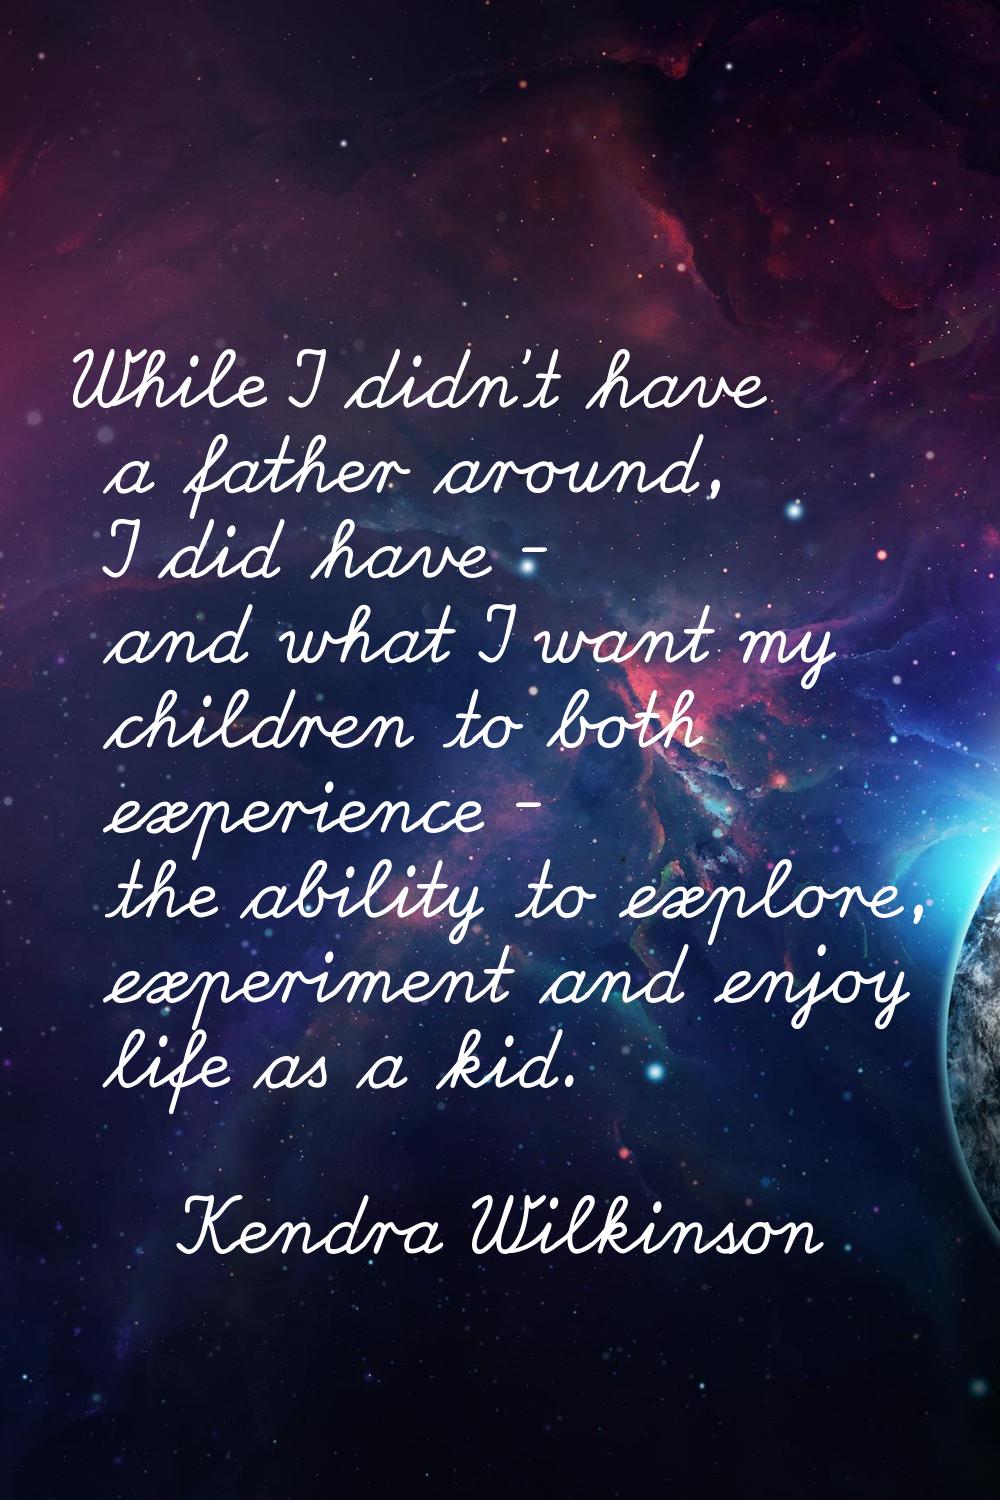 While I didn't have a father around, I did have - and what I want my children to both experience - 